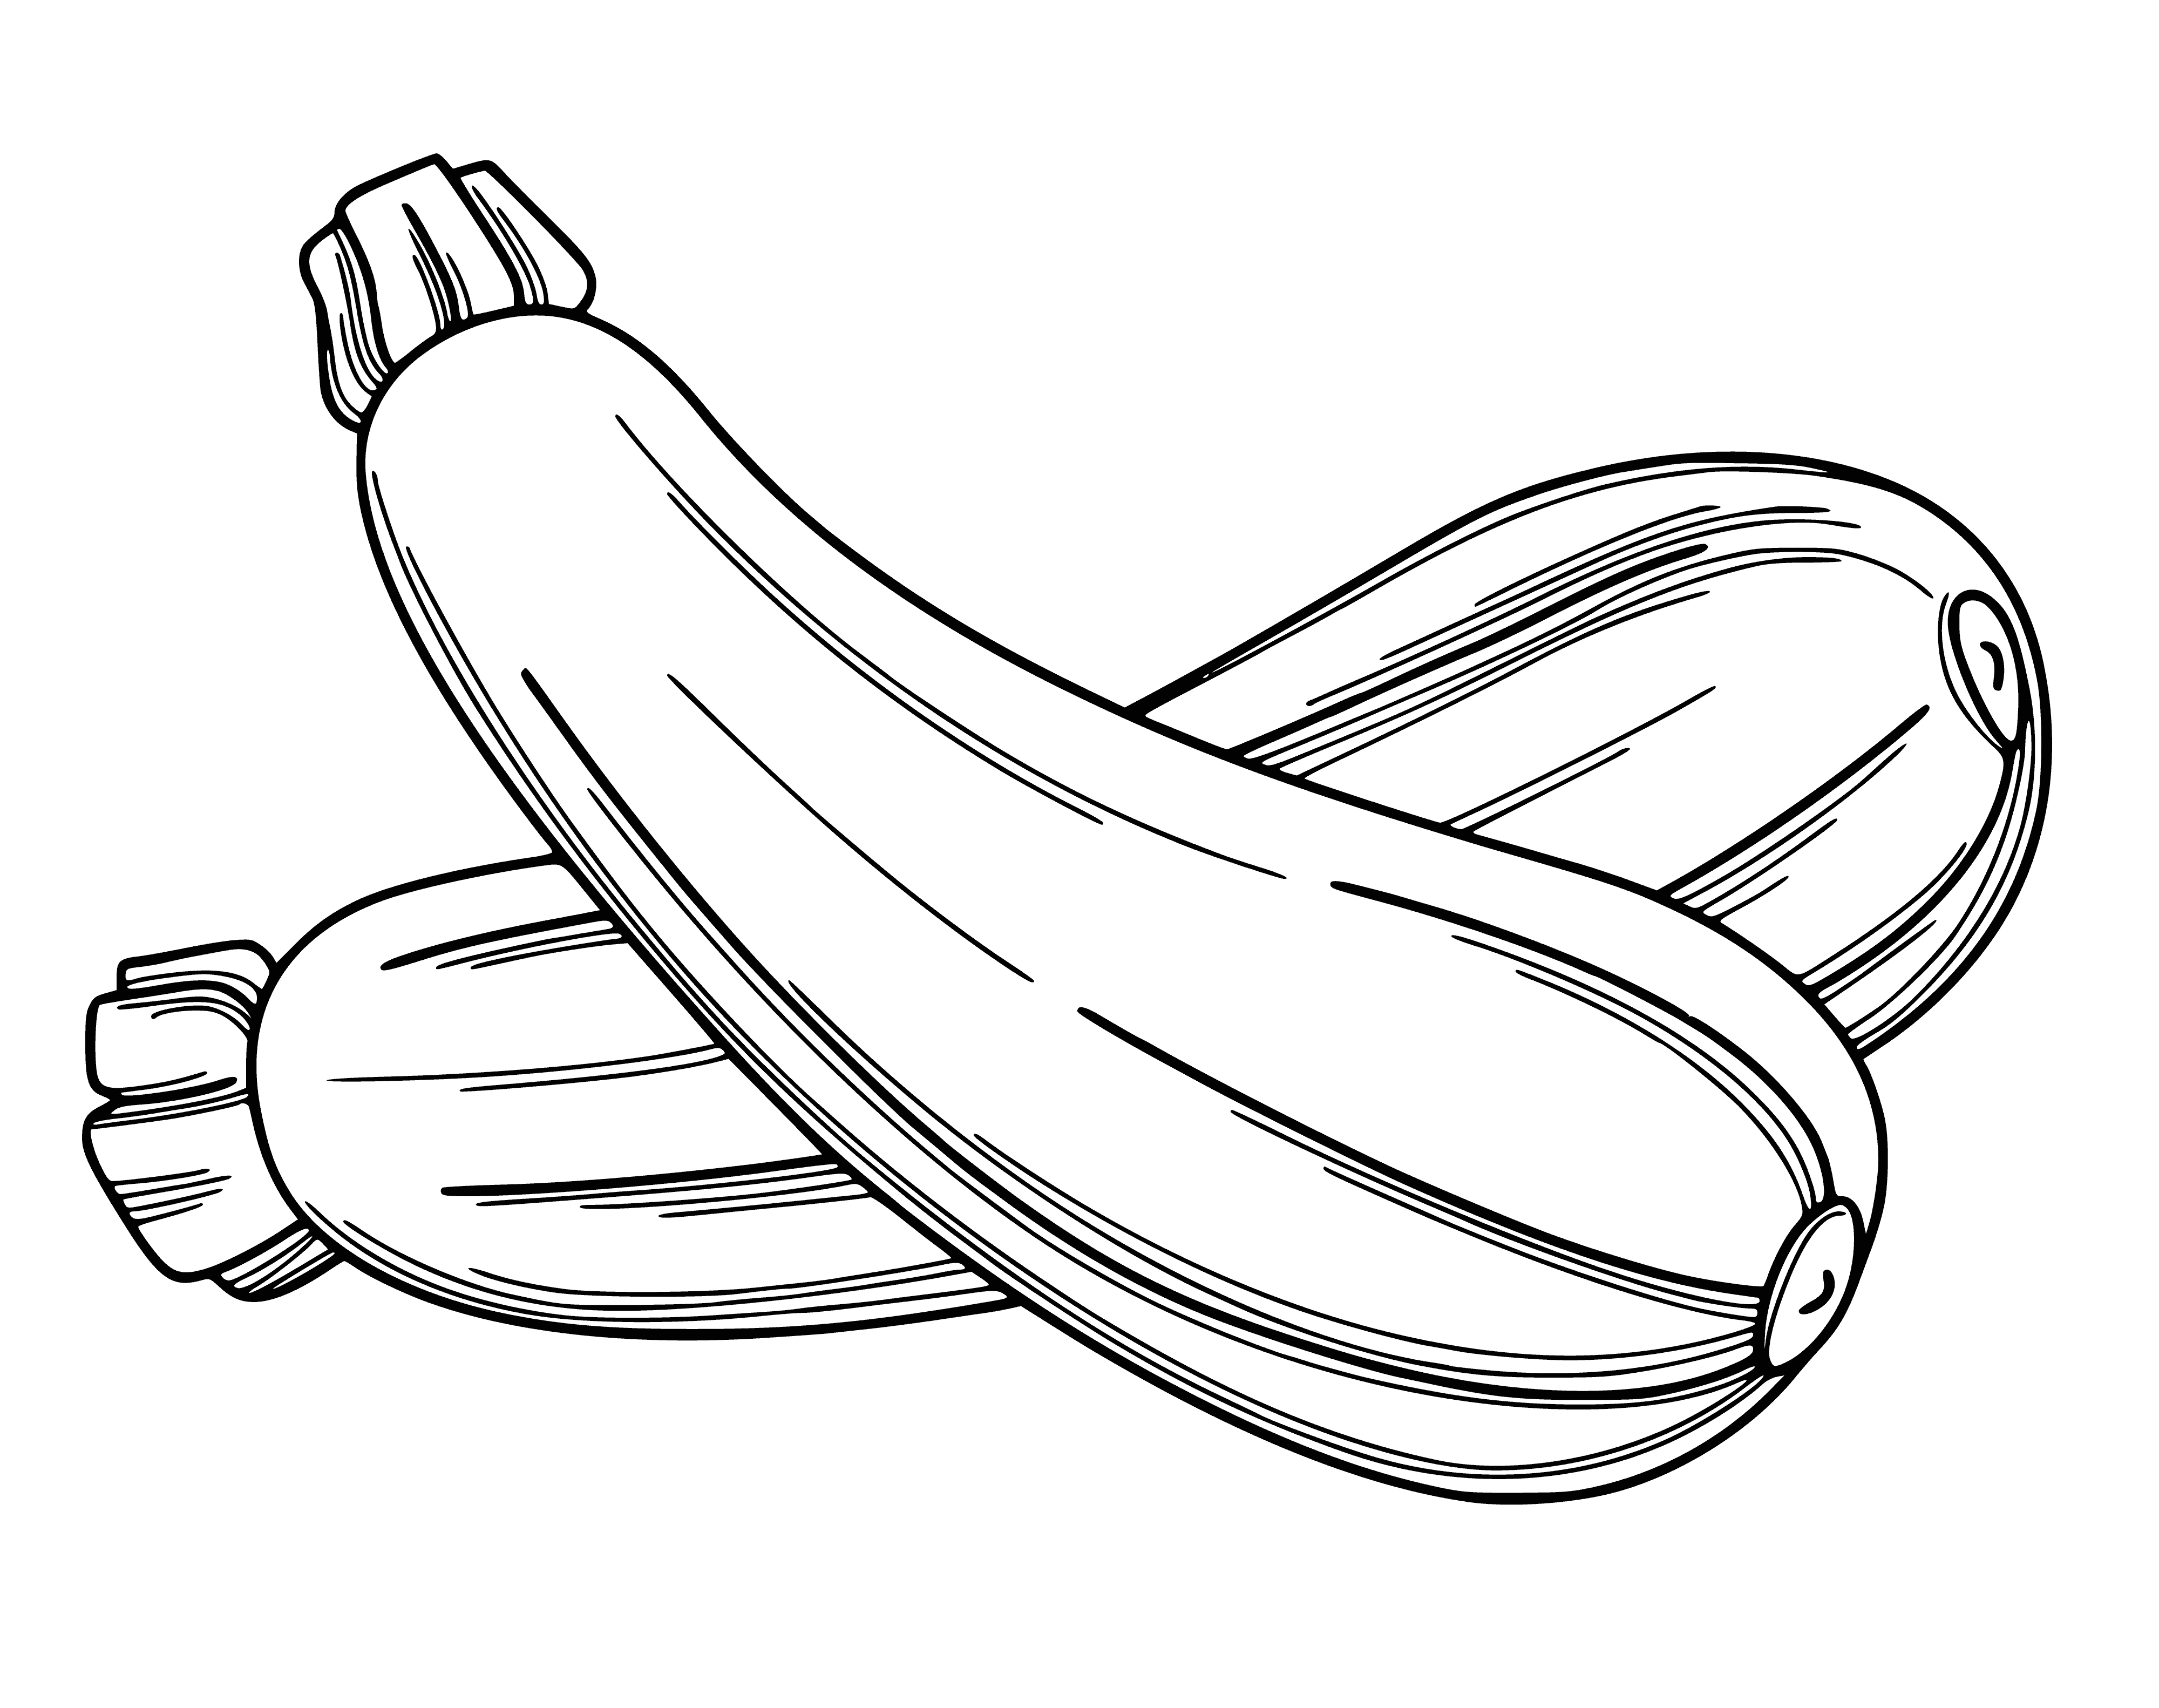 coloring page: Three zucchinis of different sizes and shades of green with bumps and curves.